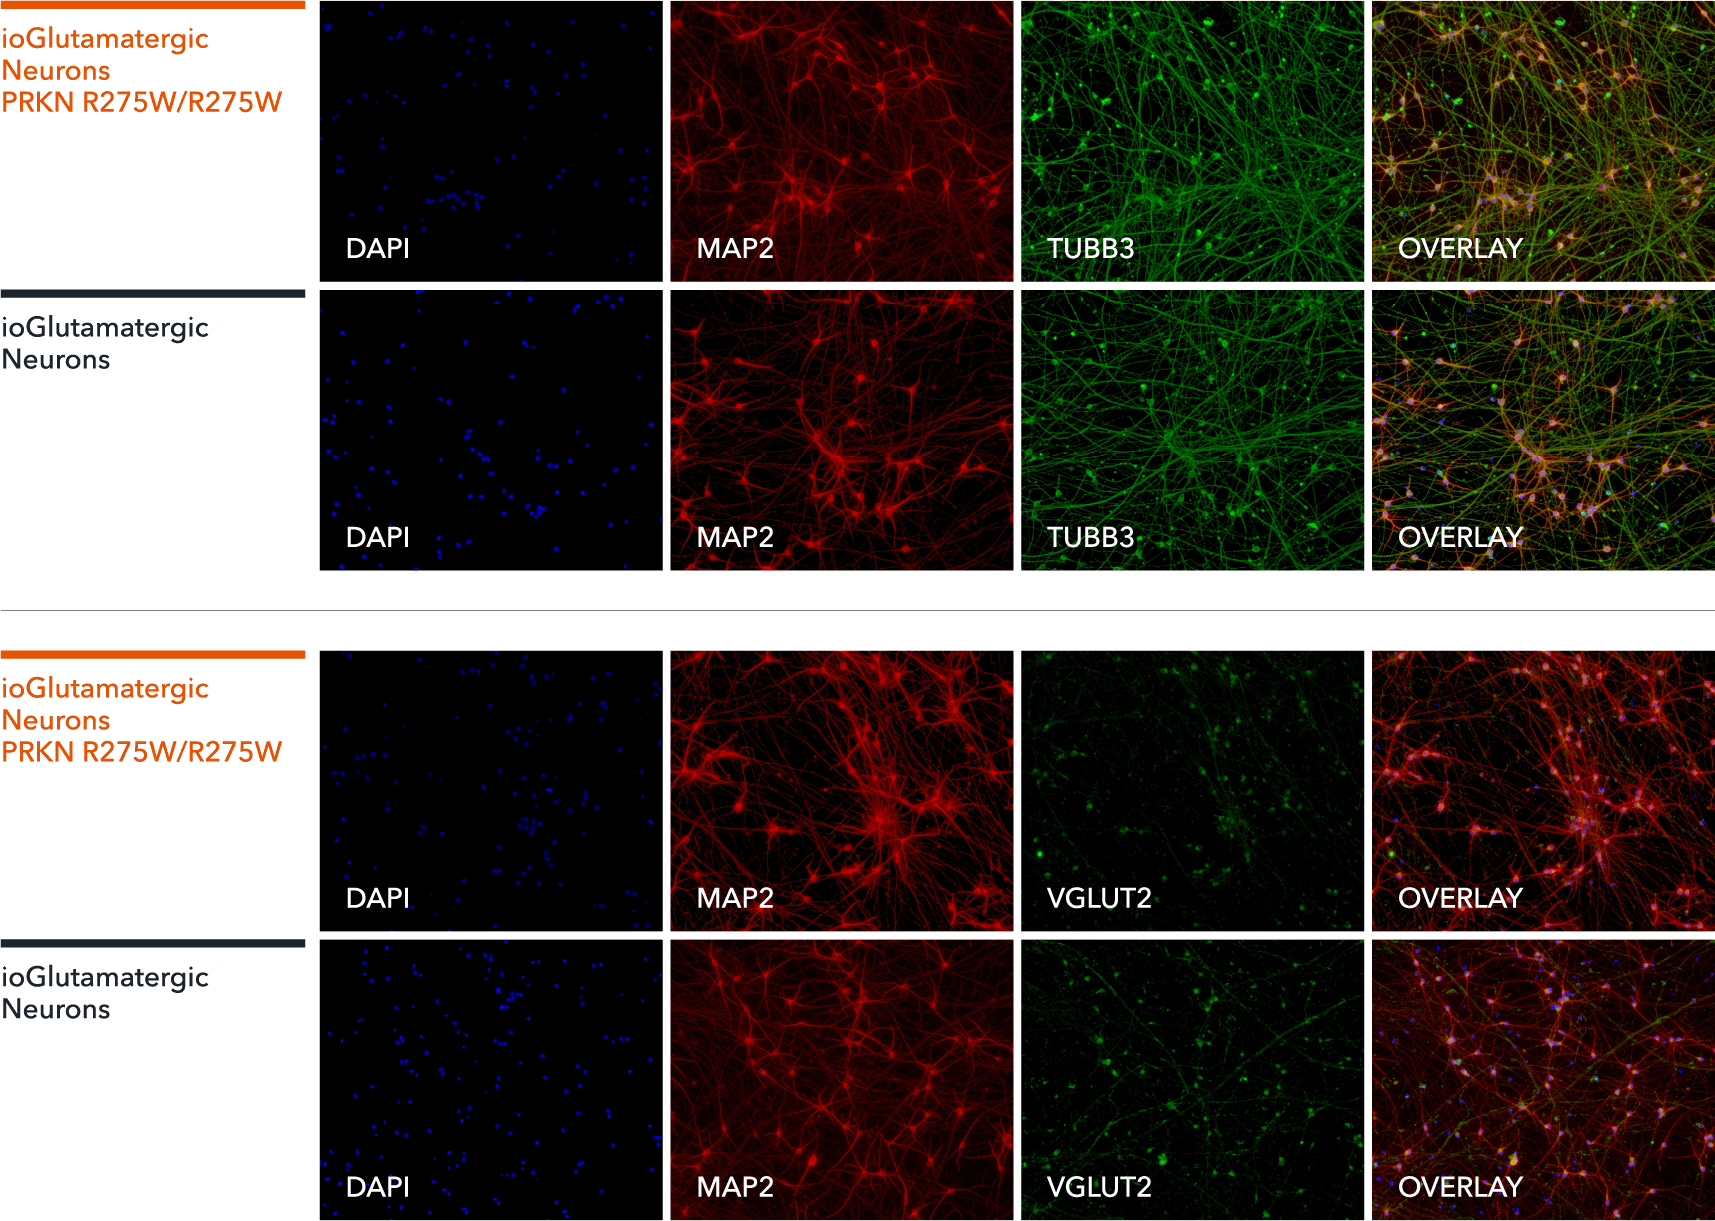 ICC showing that ioGlutamatergic Neurons PRKN R275W/R275W express pan neuronal markers